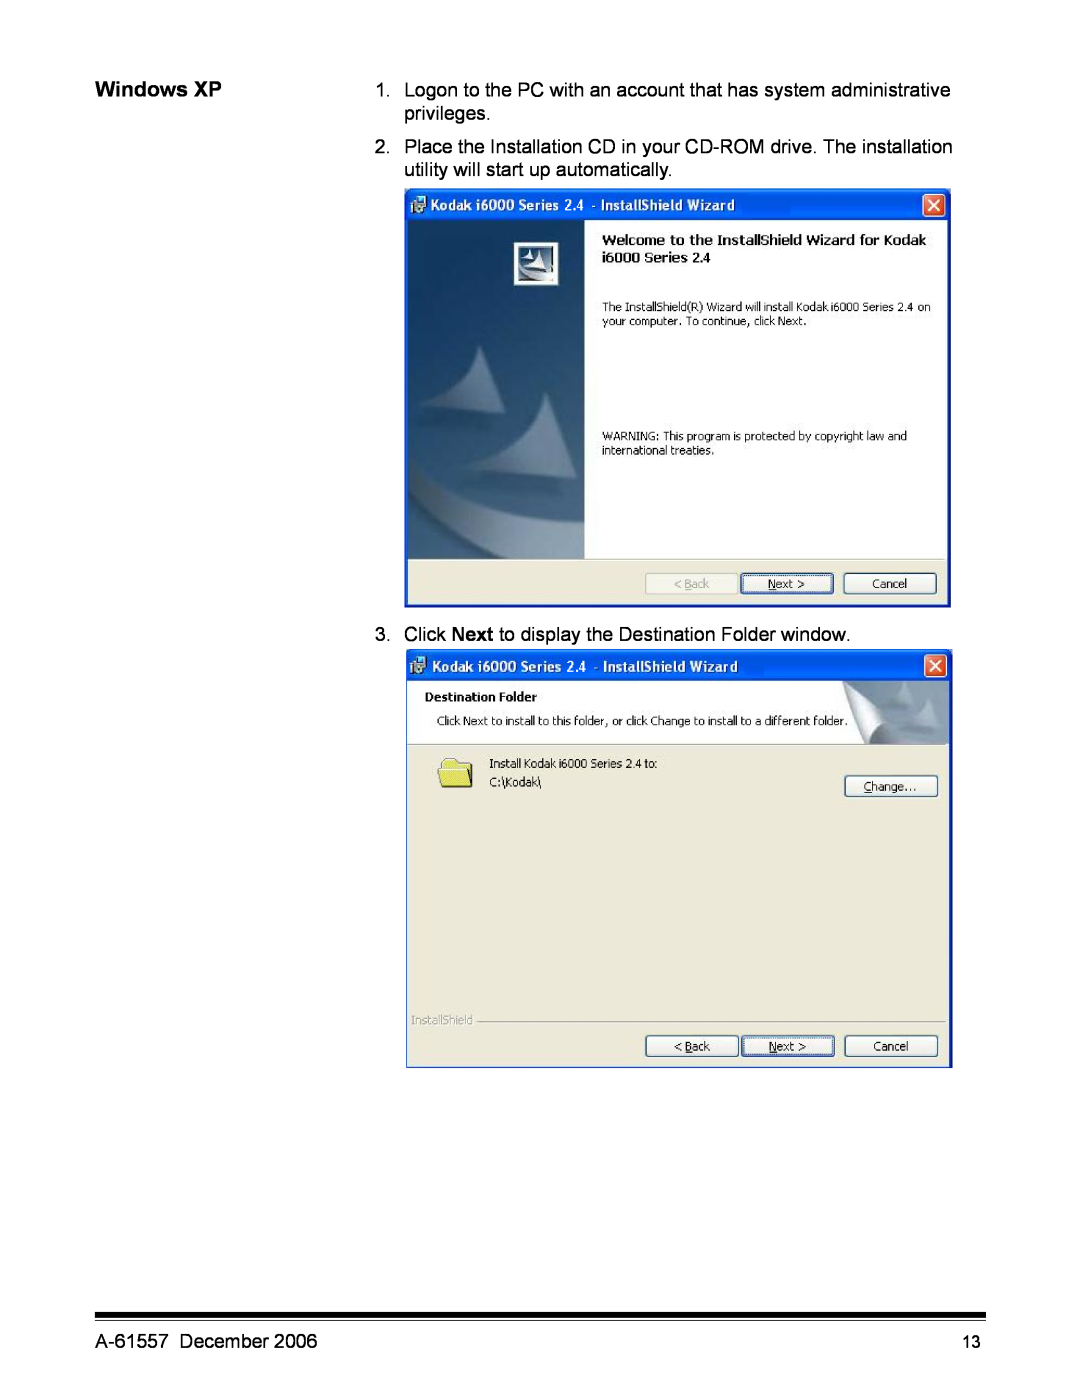 Kodak manual Windows XP, Logon to the PC with an account that has system administrative, privileges, A-61557 December 